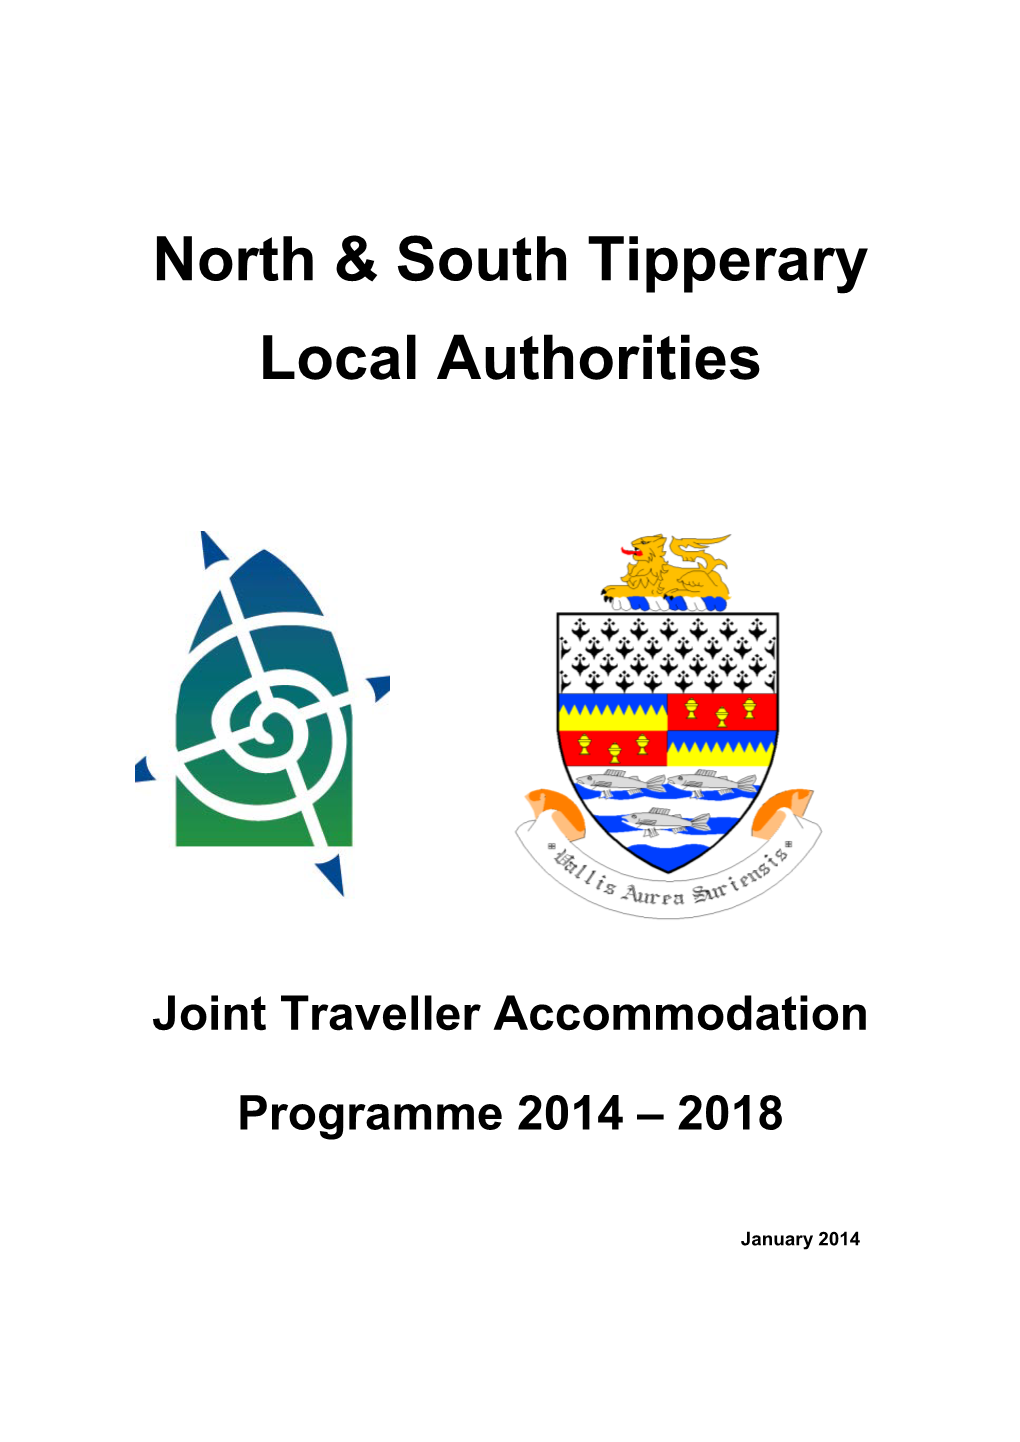 North & South Tipperary Local Authorities